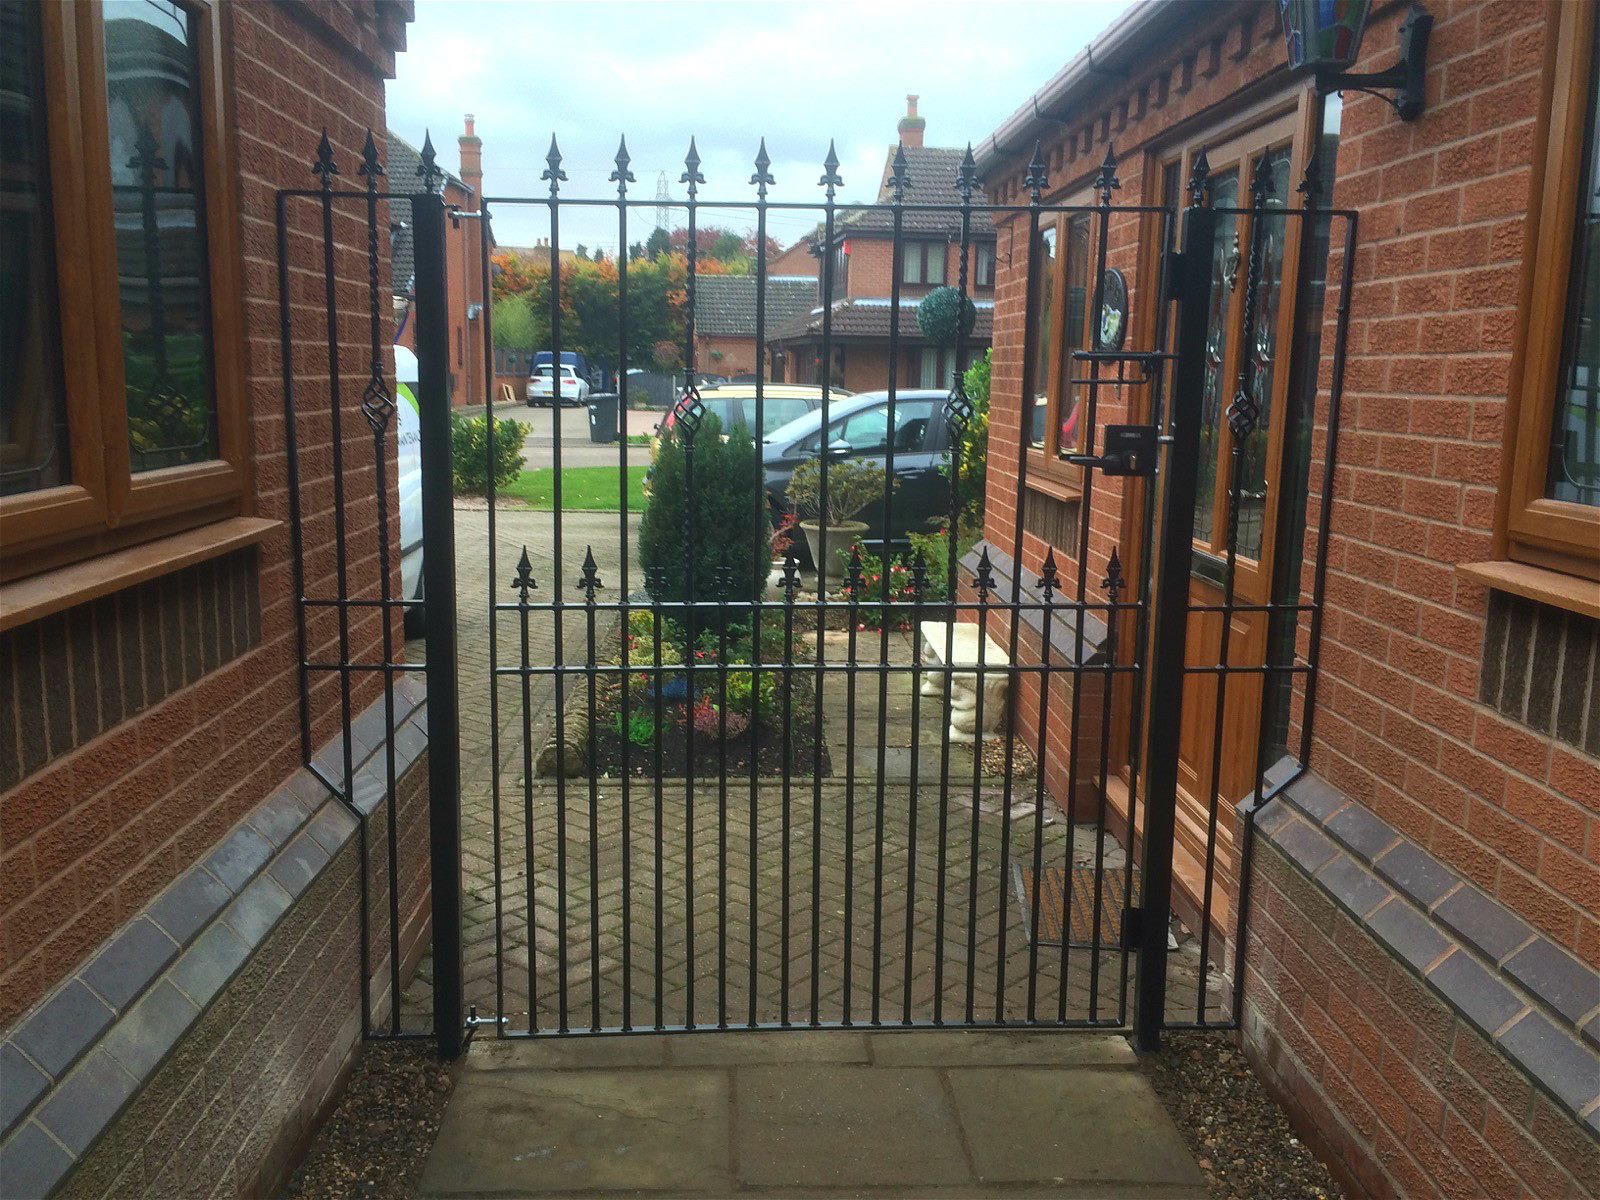 Bespoke side gate and made to measure side panels with fleur de lys finials